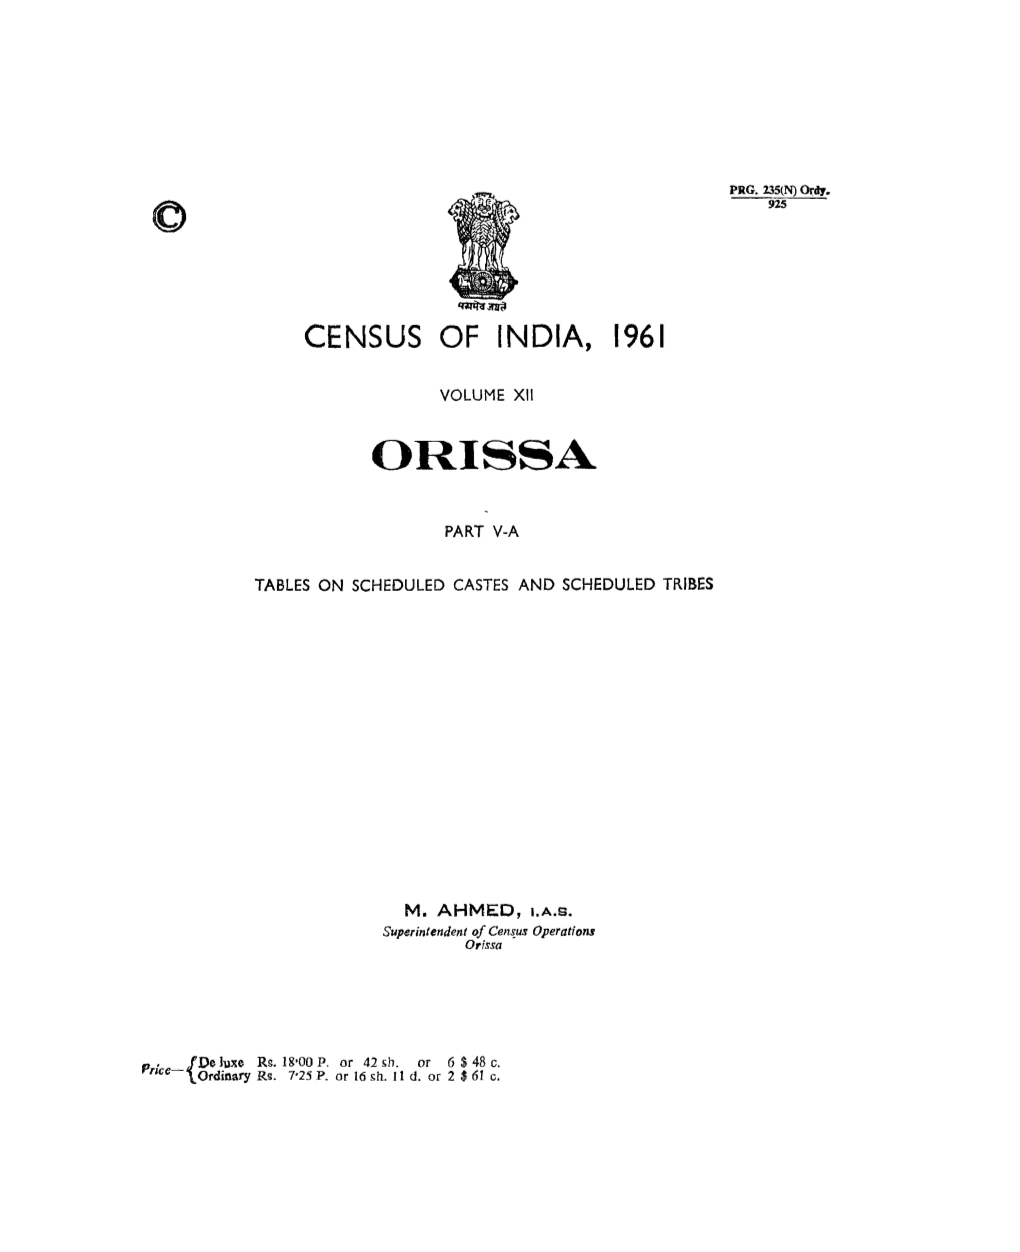 Tables on Scheduled Castes and Scheduled Tribes